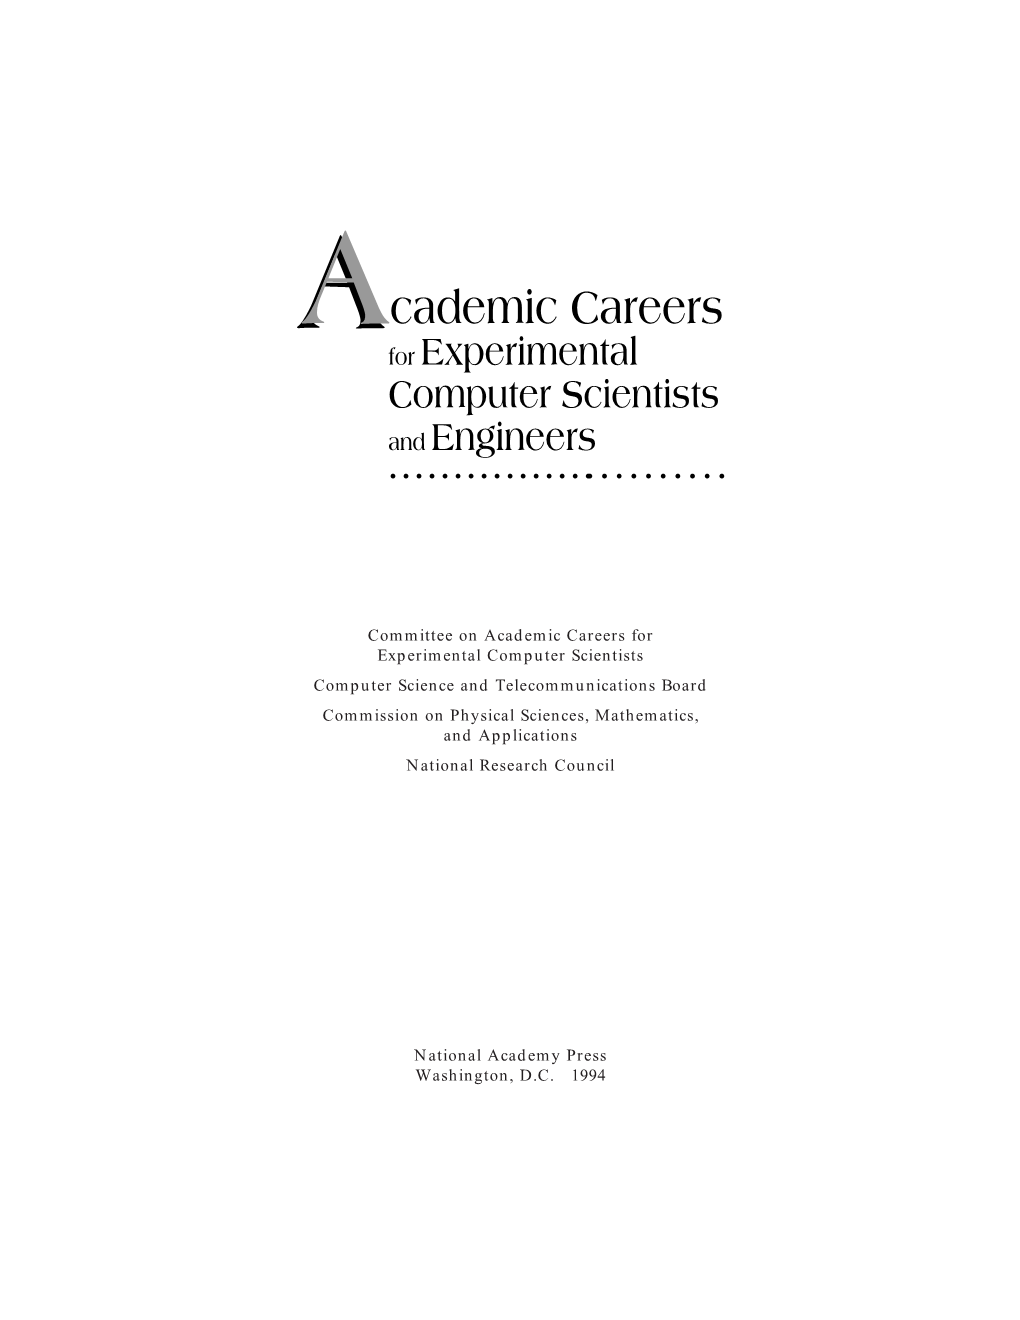 Academic Careers for Experimental Computer Scientists and Engineers